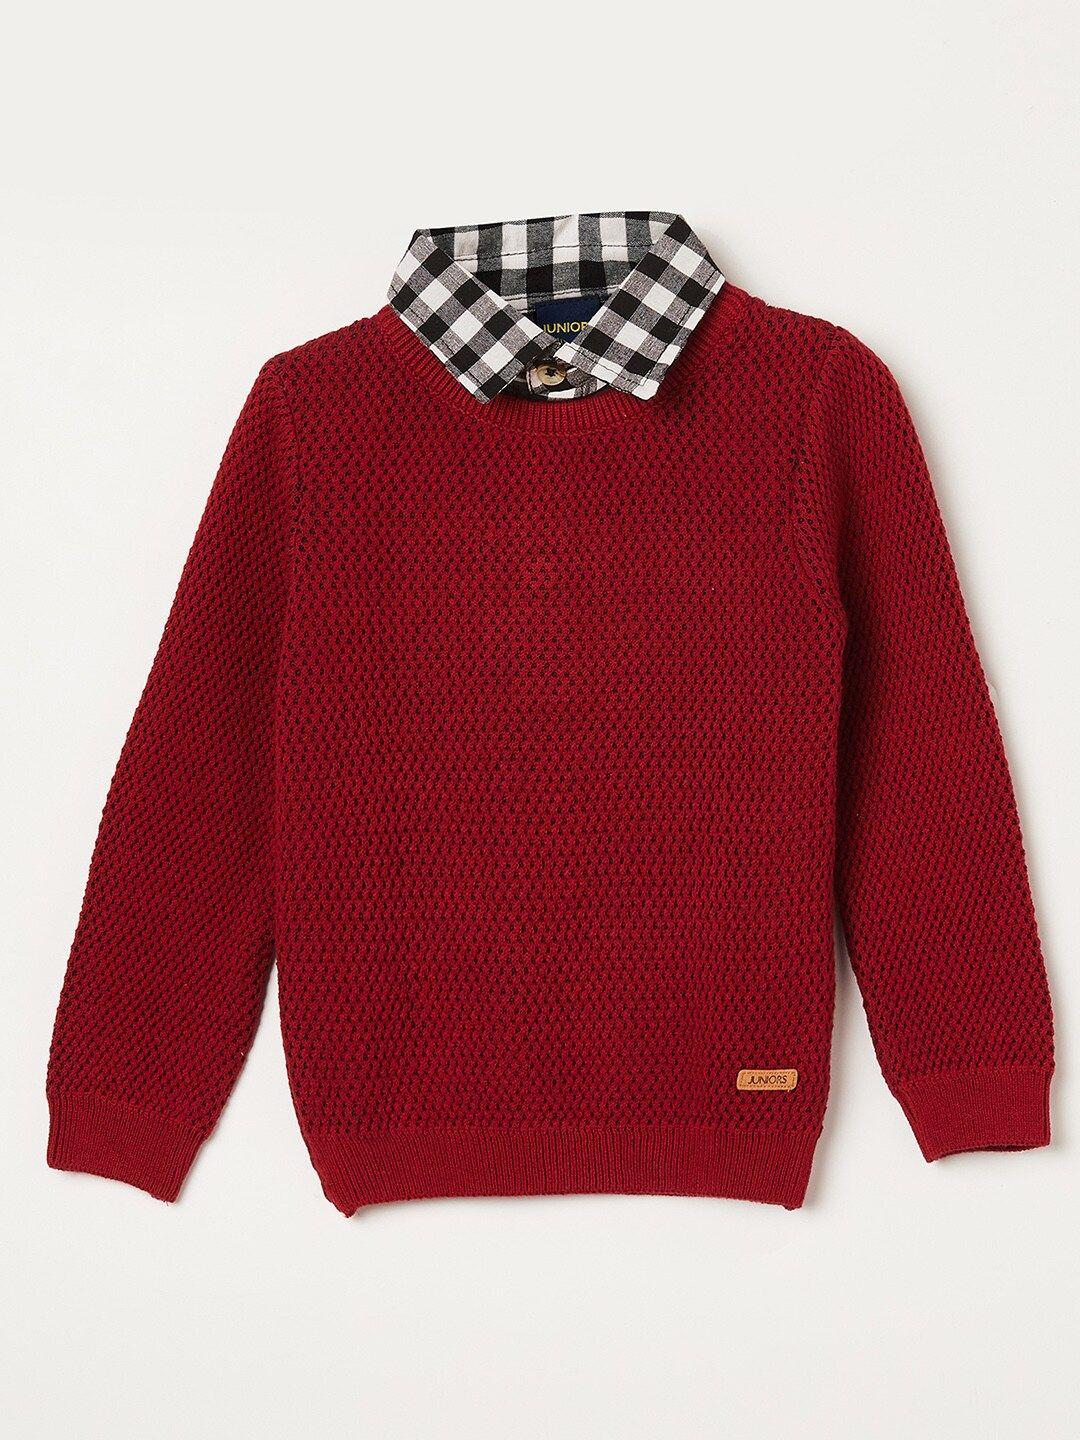 juniors-by-lifestyle-boys-maroon-ribbed-cotton-pullover-sweaters